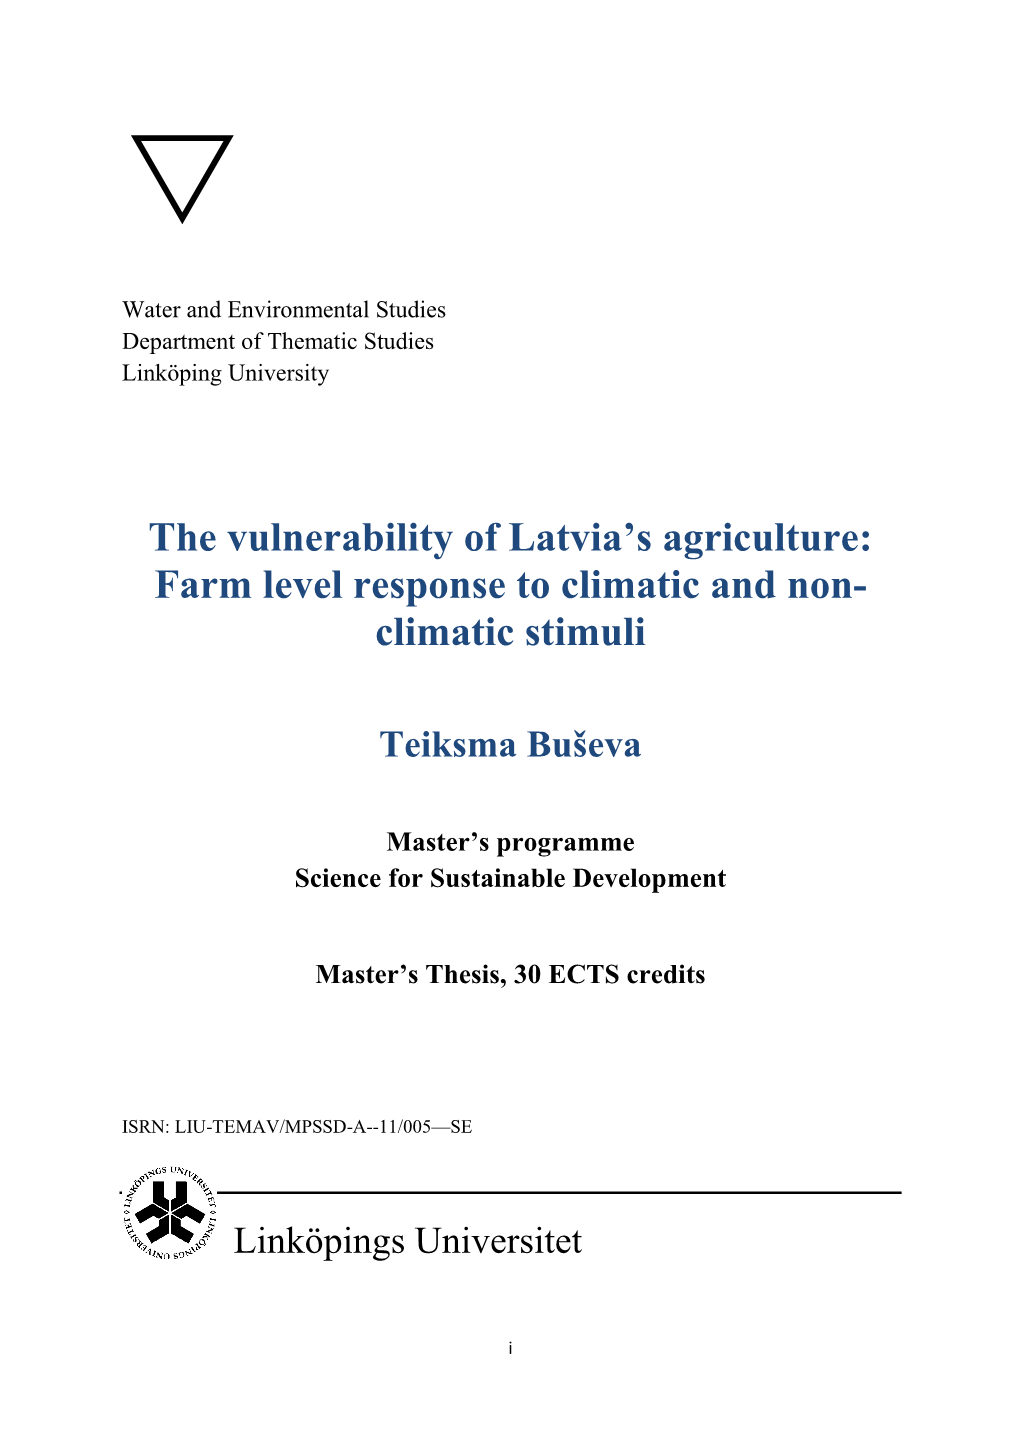 The Vulnerability of Latvia's Agriculture